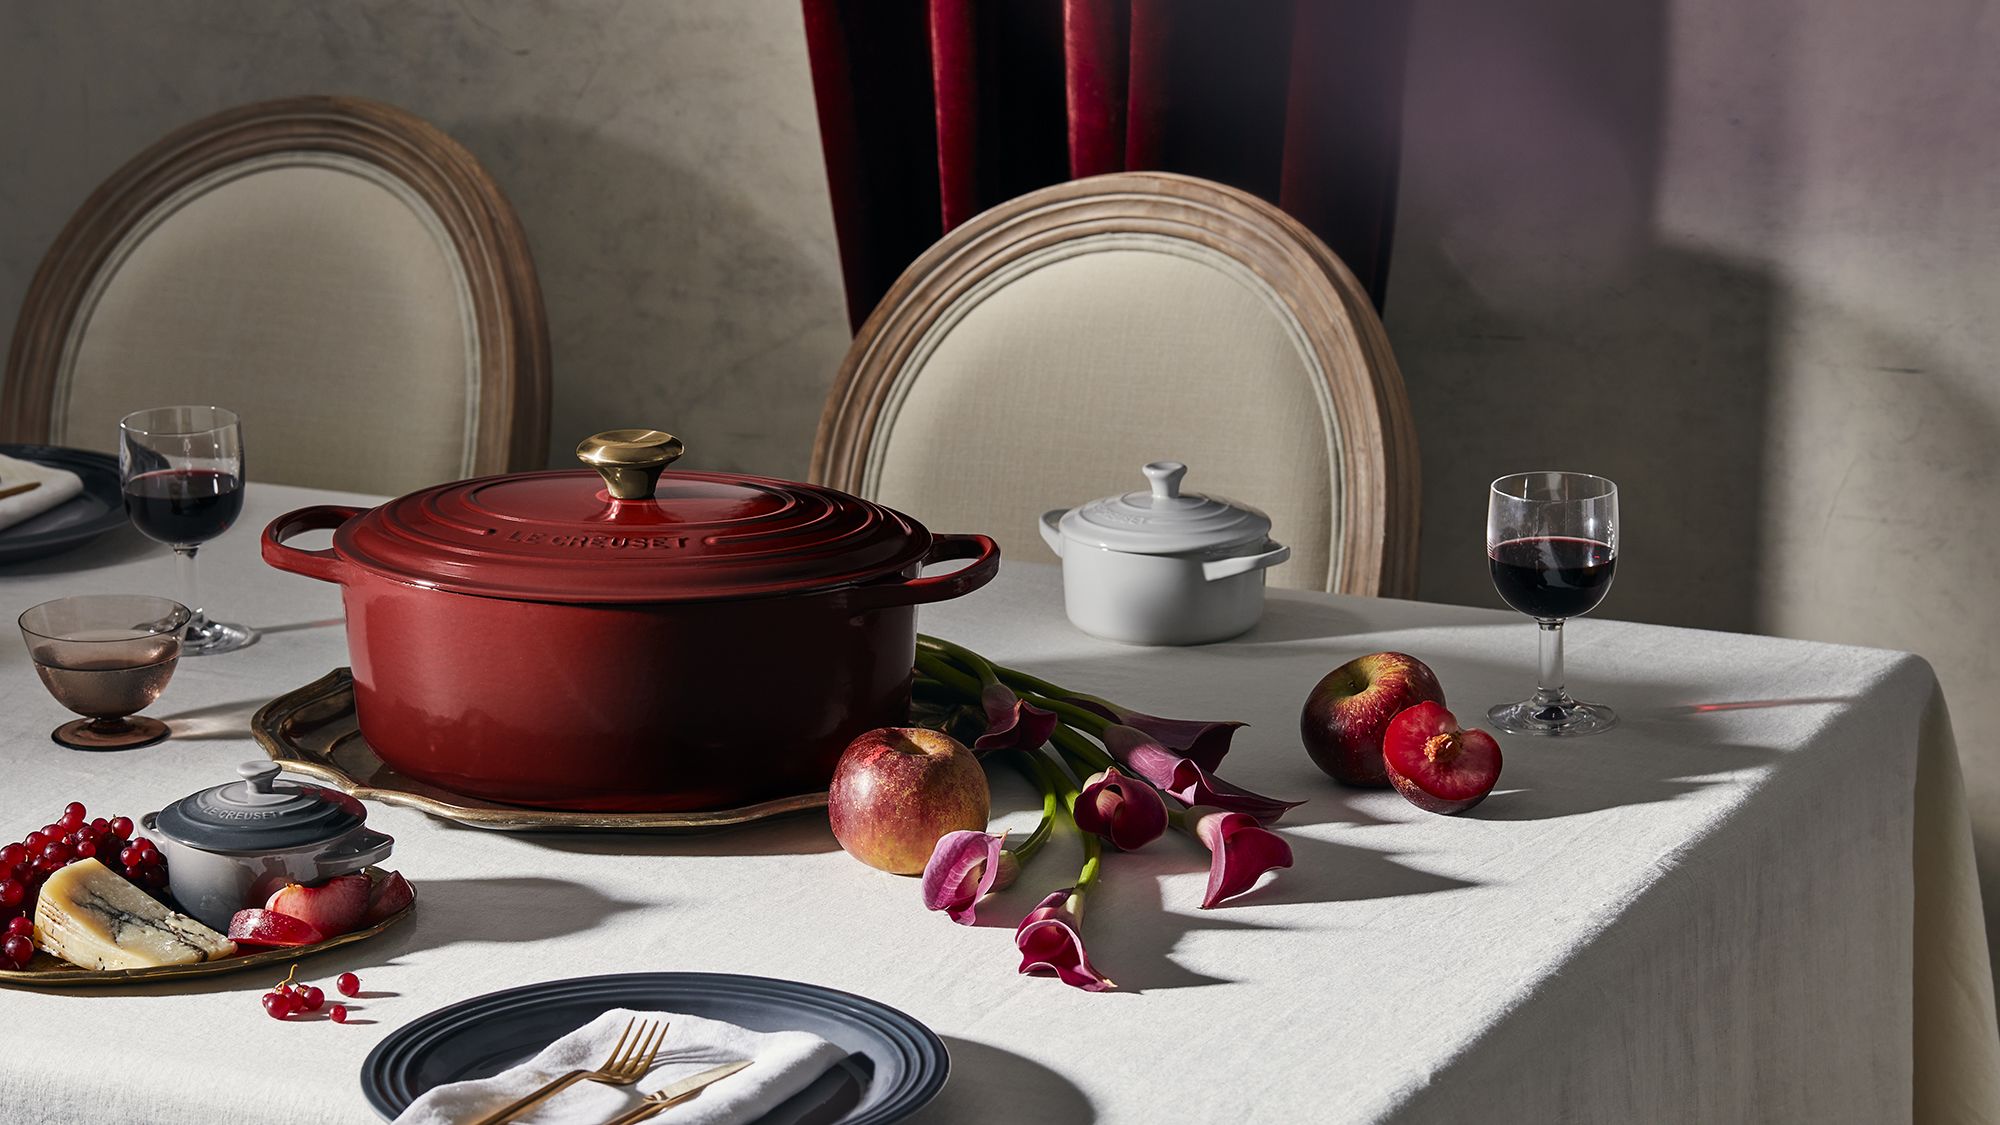 Le Creuset Black Friday and Cyber Monday Sale 2022